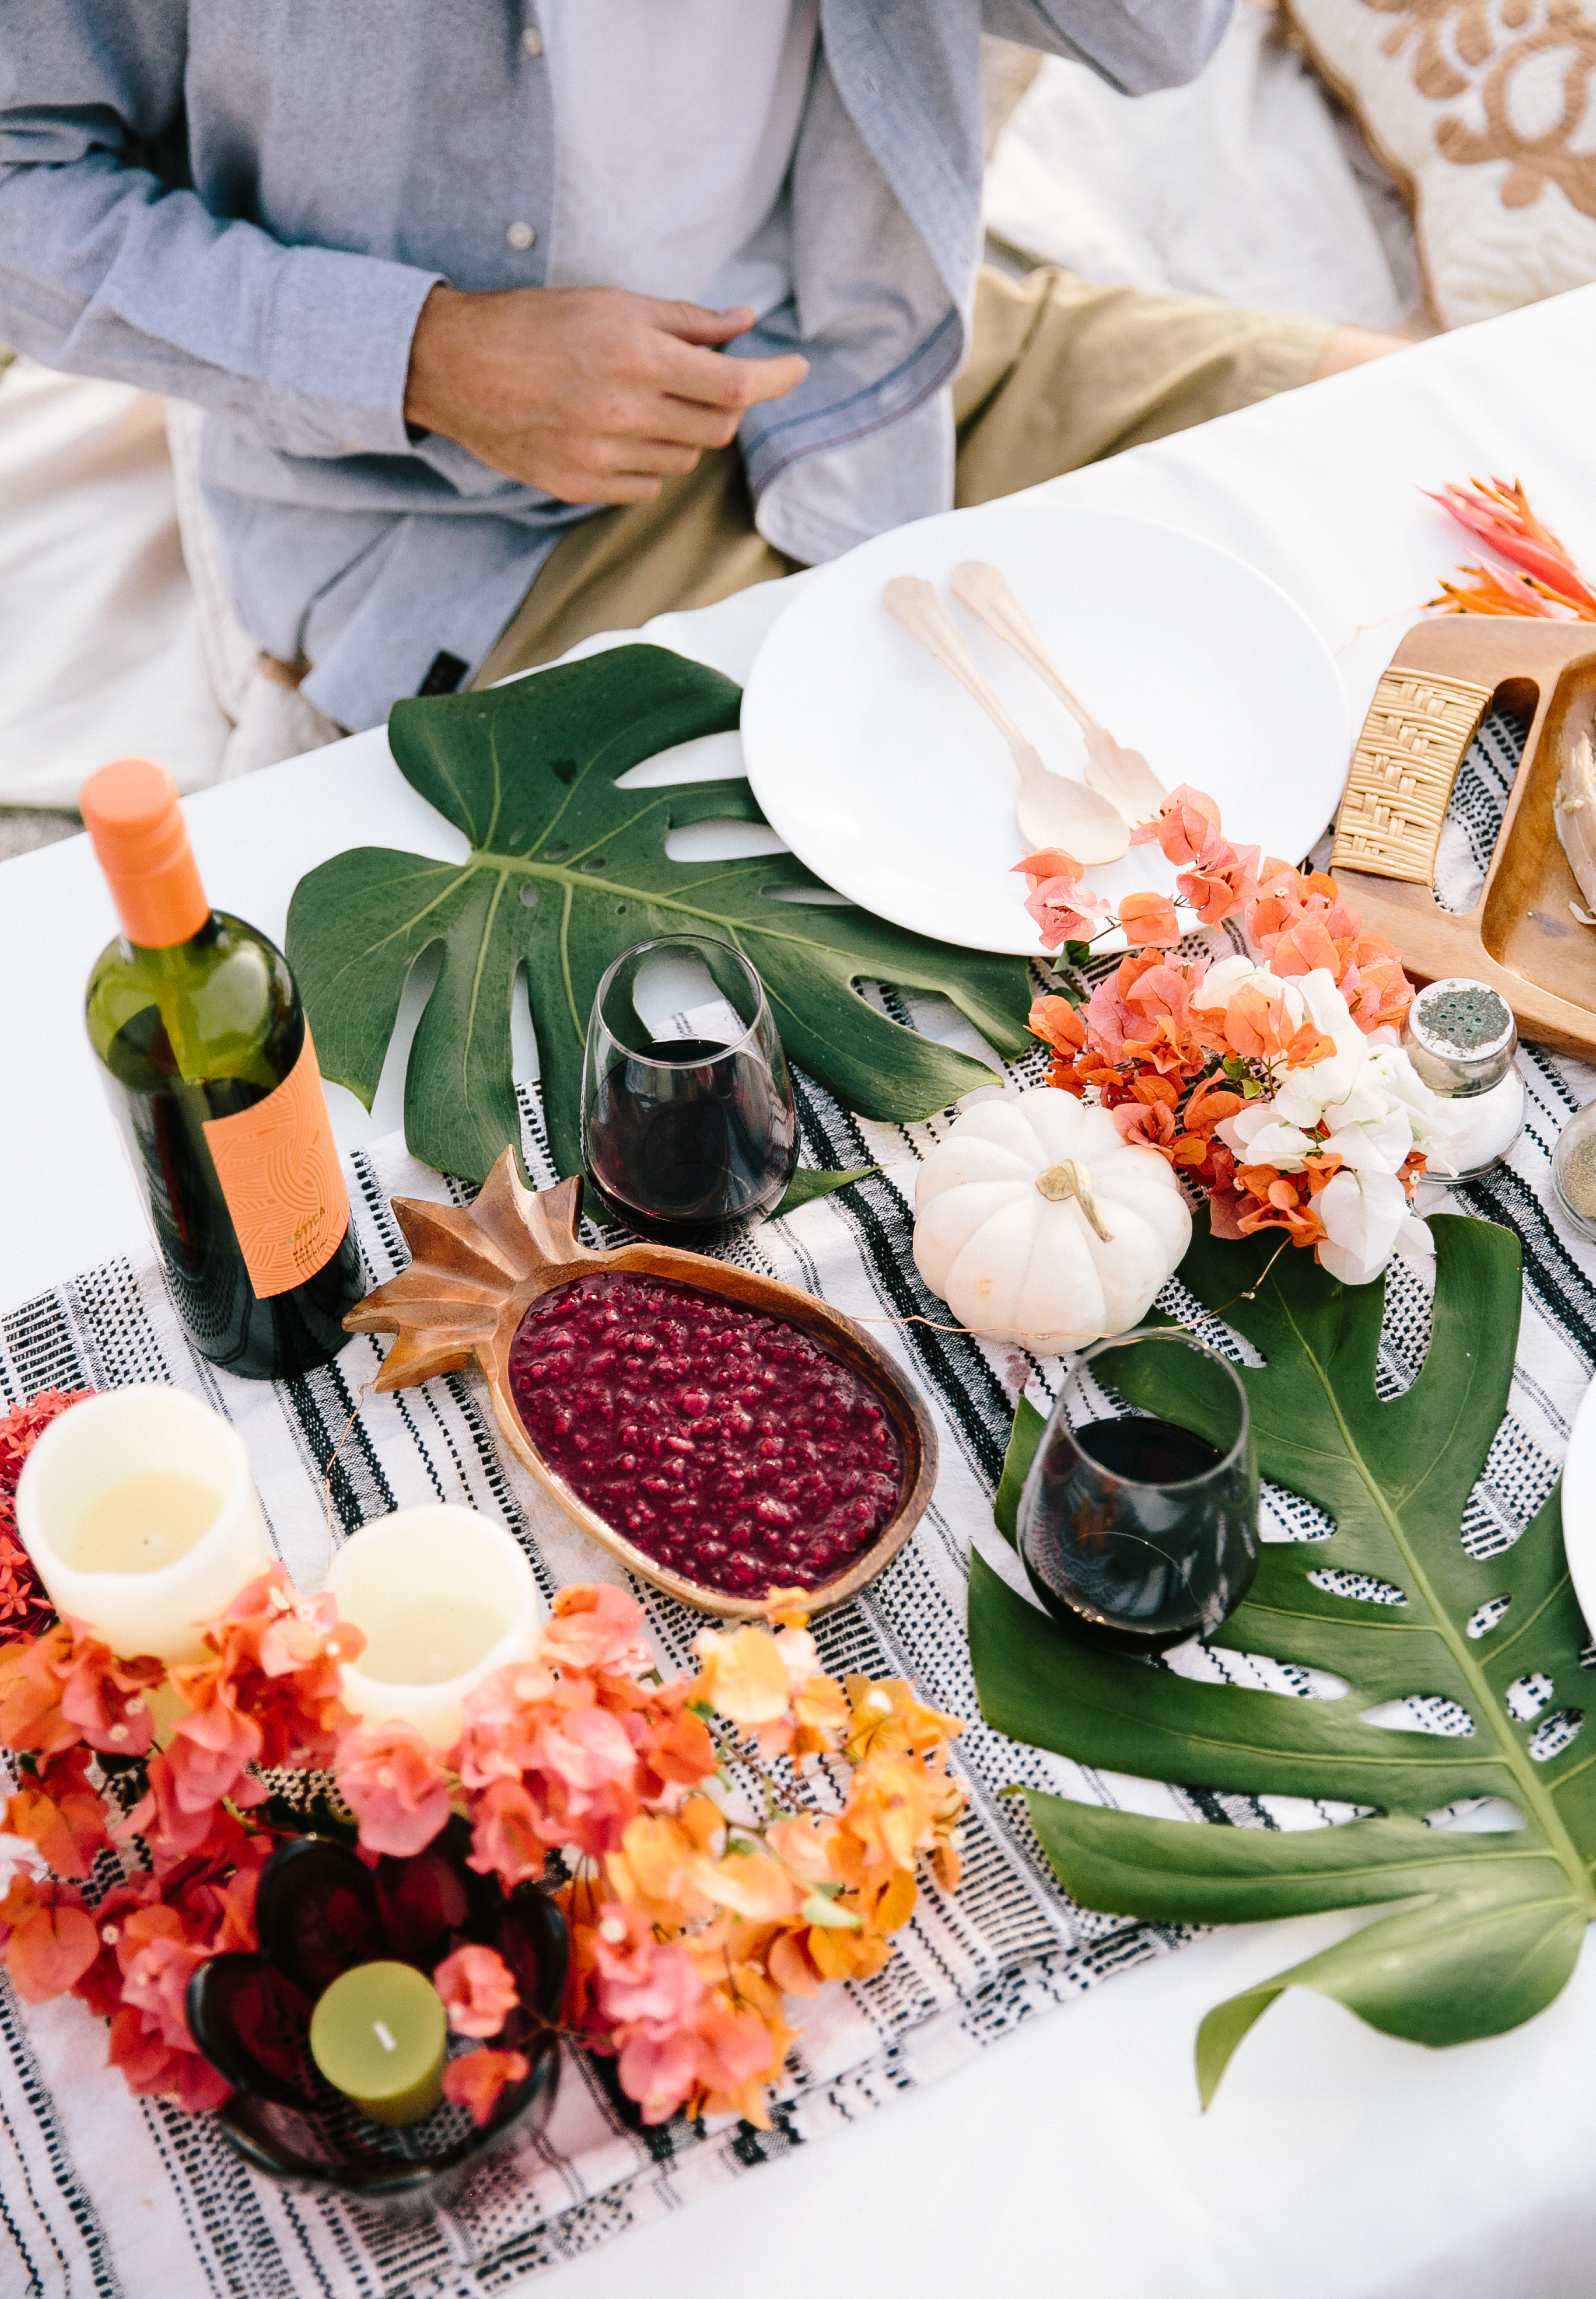 Hawaii-based photographer, educator, blogger and entertainer Elana Jadallah of ElanaLoo.com shares her tips on how to host a festive feast with a tropical twist. | Tropical Thanksgiving | Hawaii Thanksgiving | Hawaii Holidays | Island Style Holidays | How to host a Beach Thanksgiving via @elanaloo + elanaloo.com